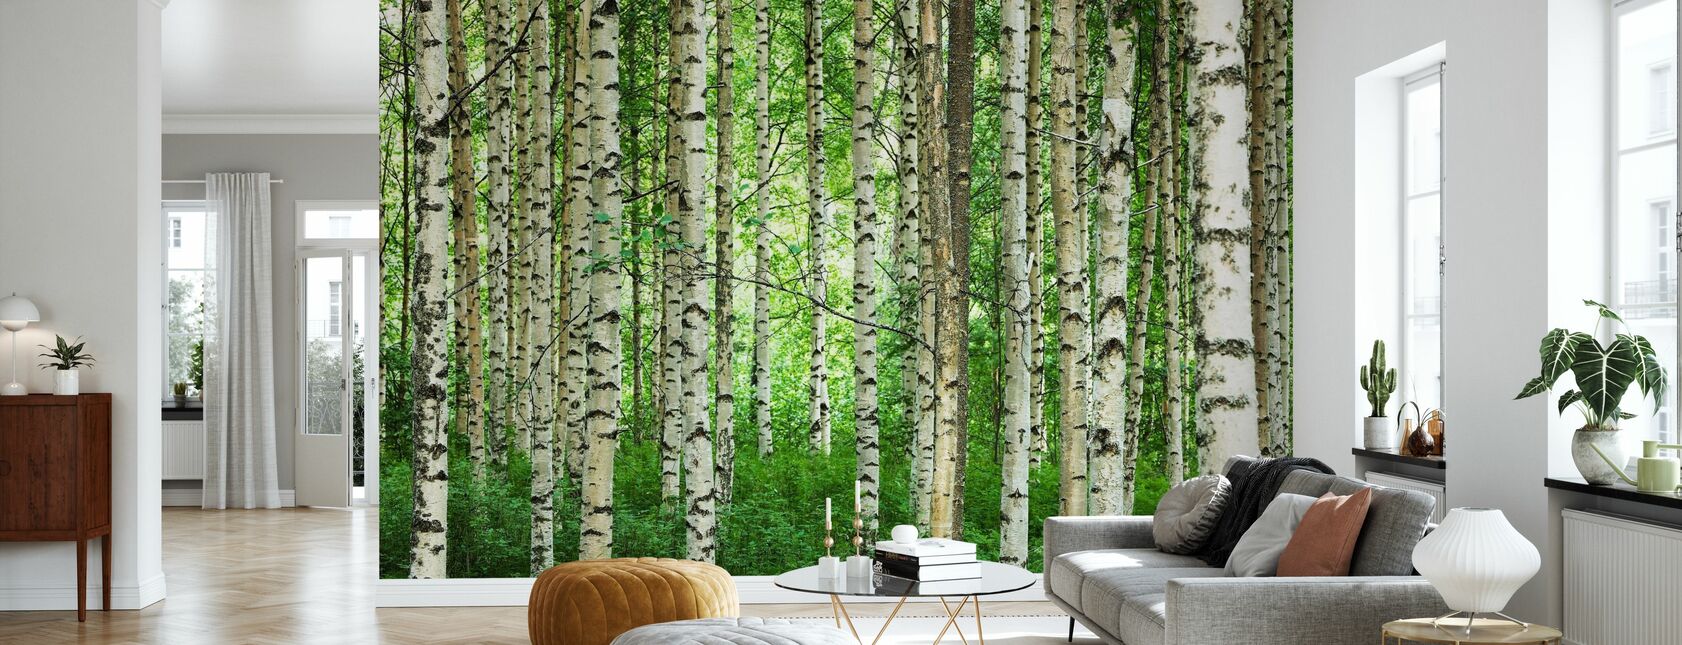 Clear Birch Forest - Wallpaper - Living Room